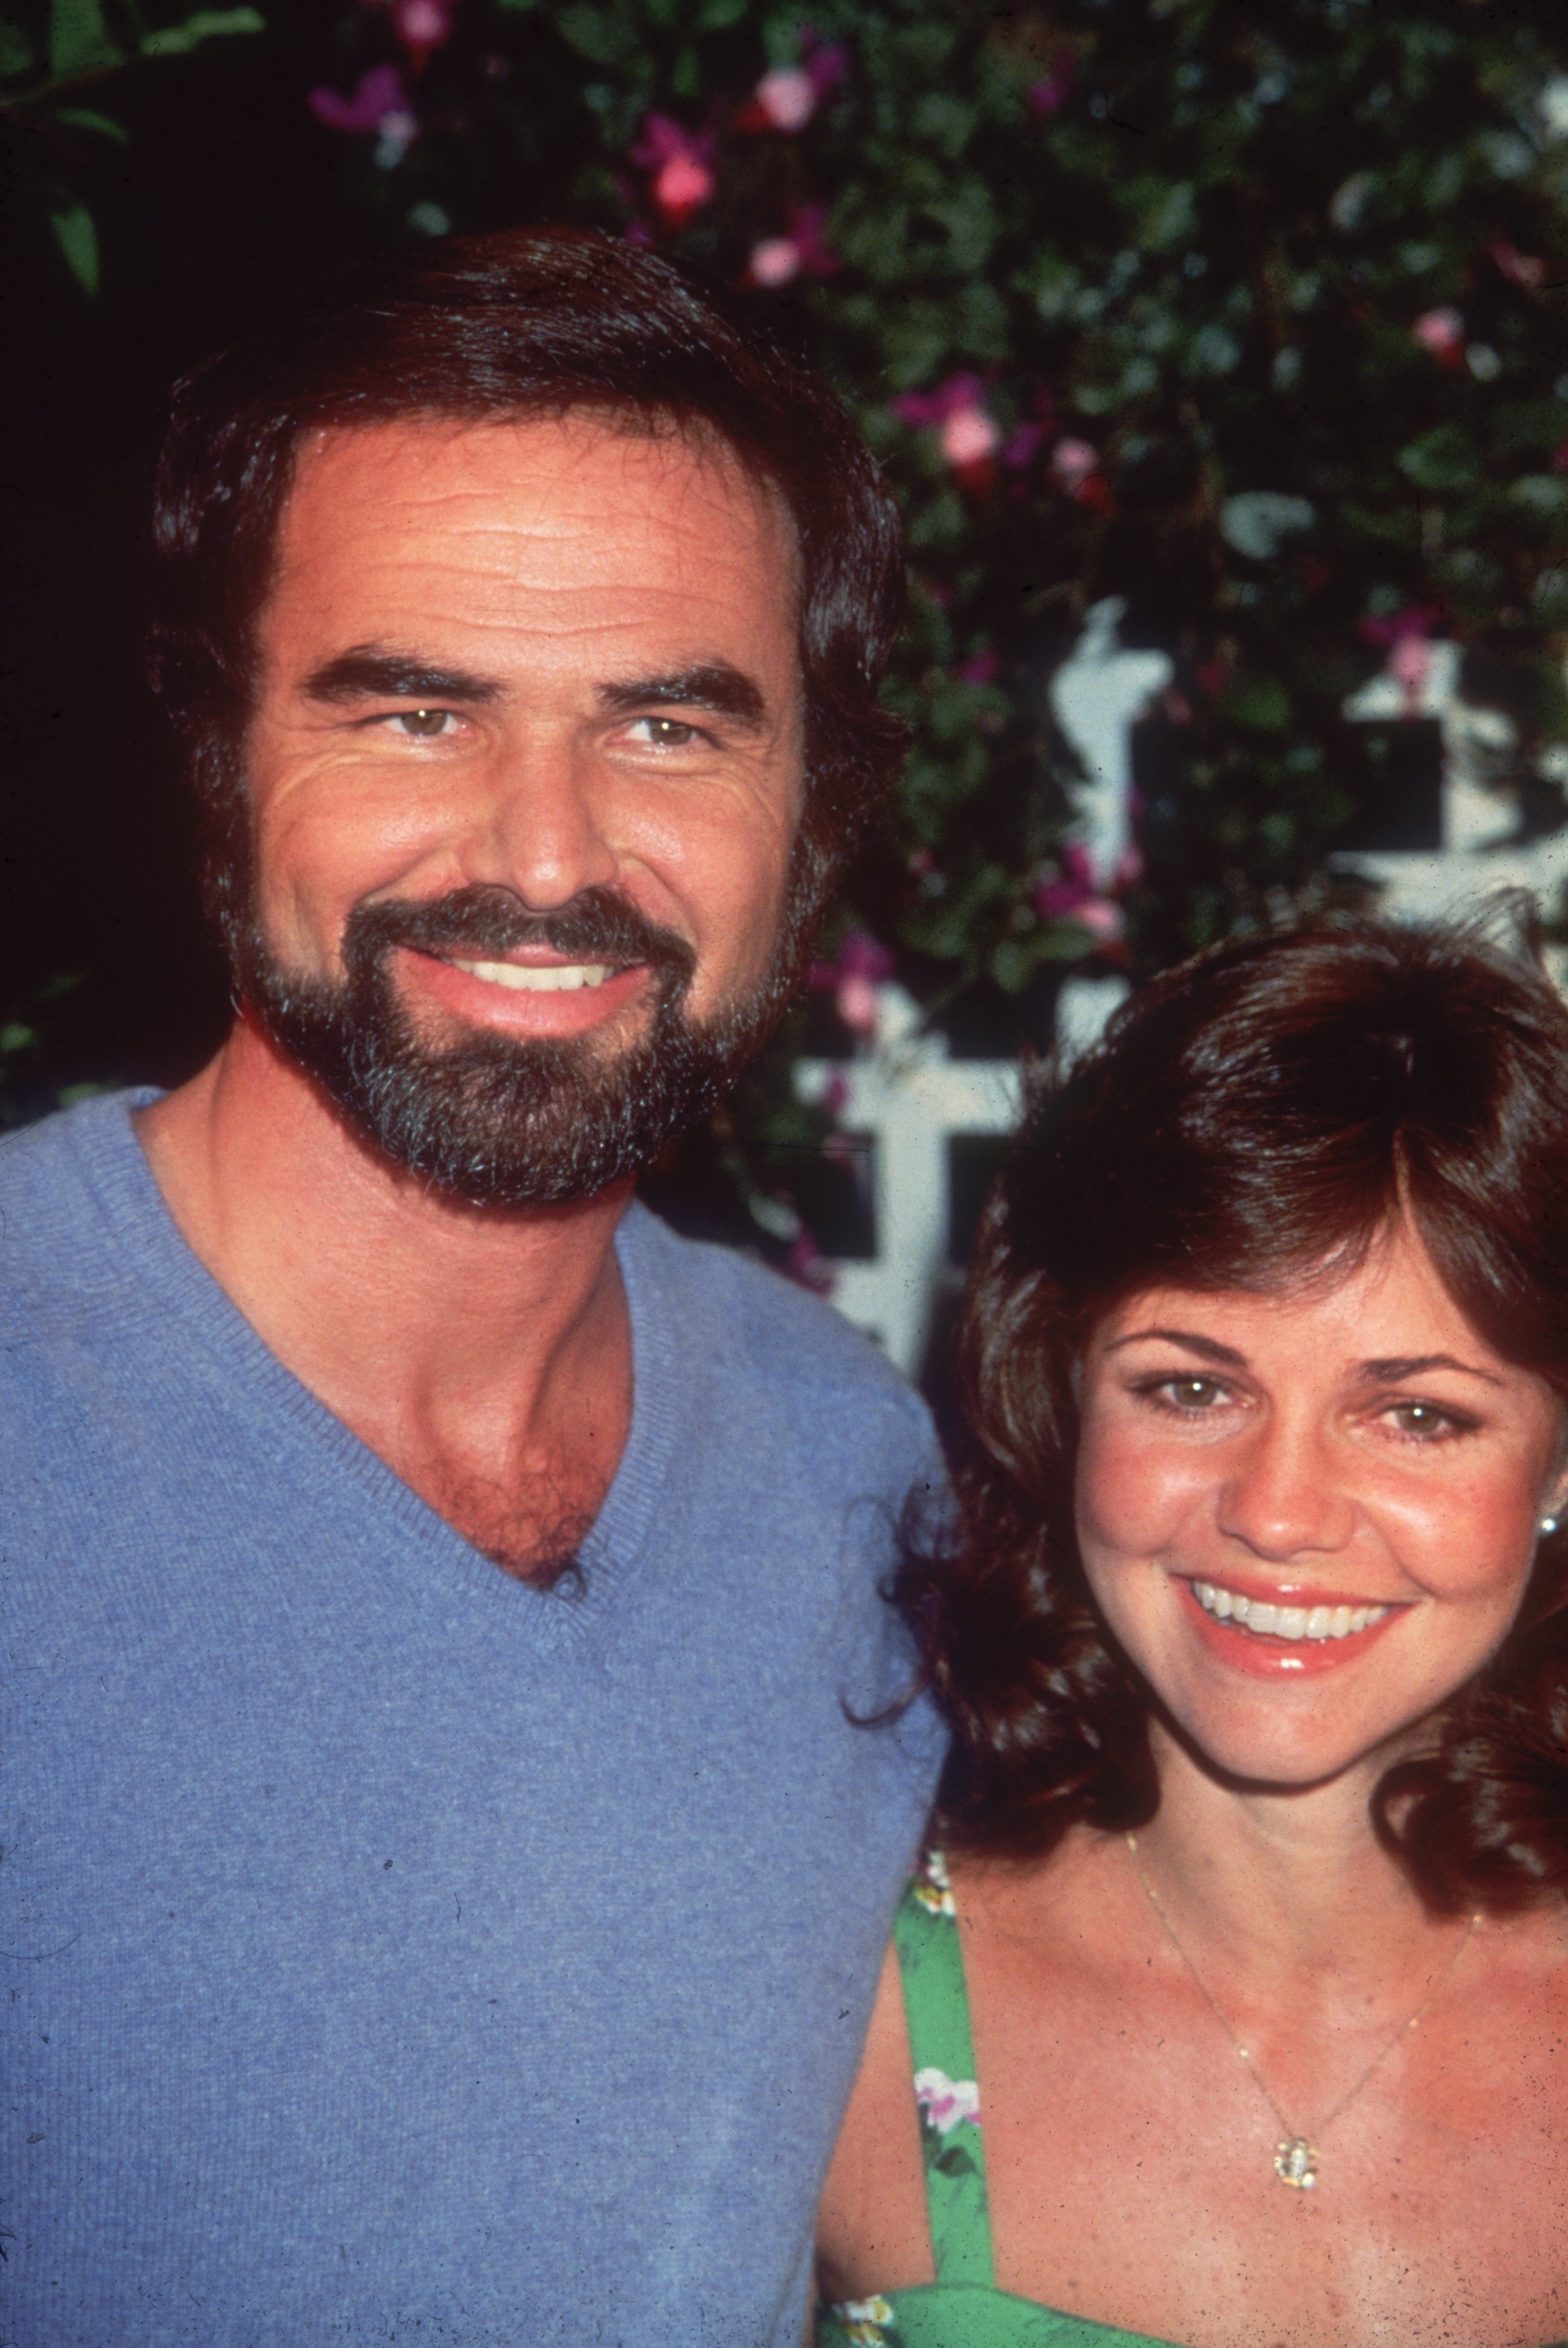 Burt Reynold and his girlfriend Sally Field attending an outdoor event on August 1, 1977 ┃Source: Getty Images